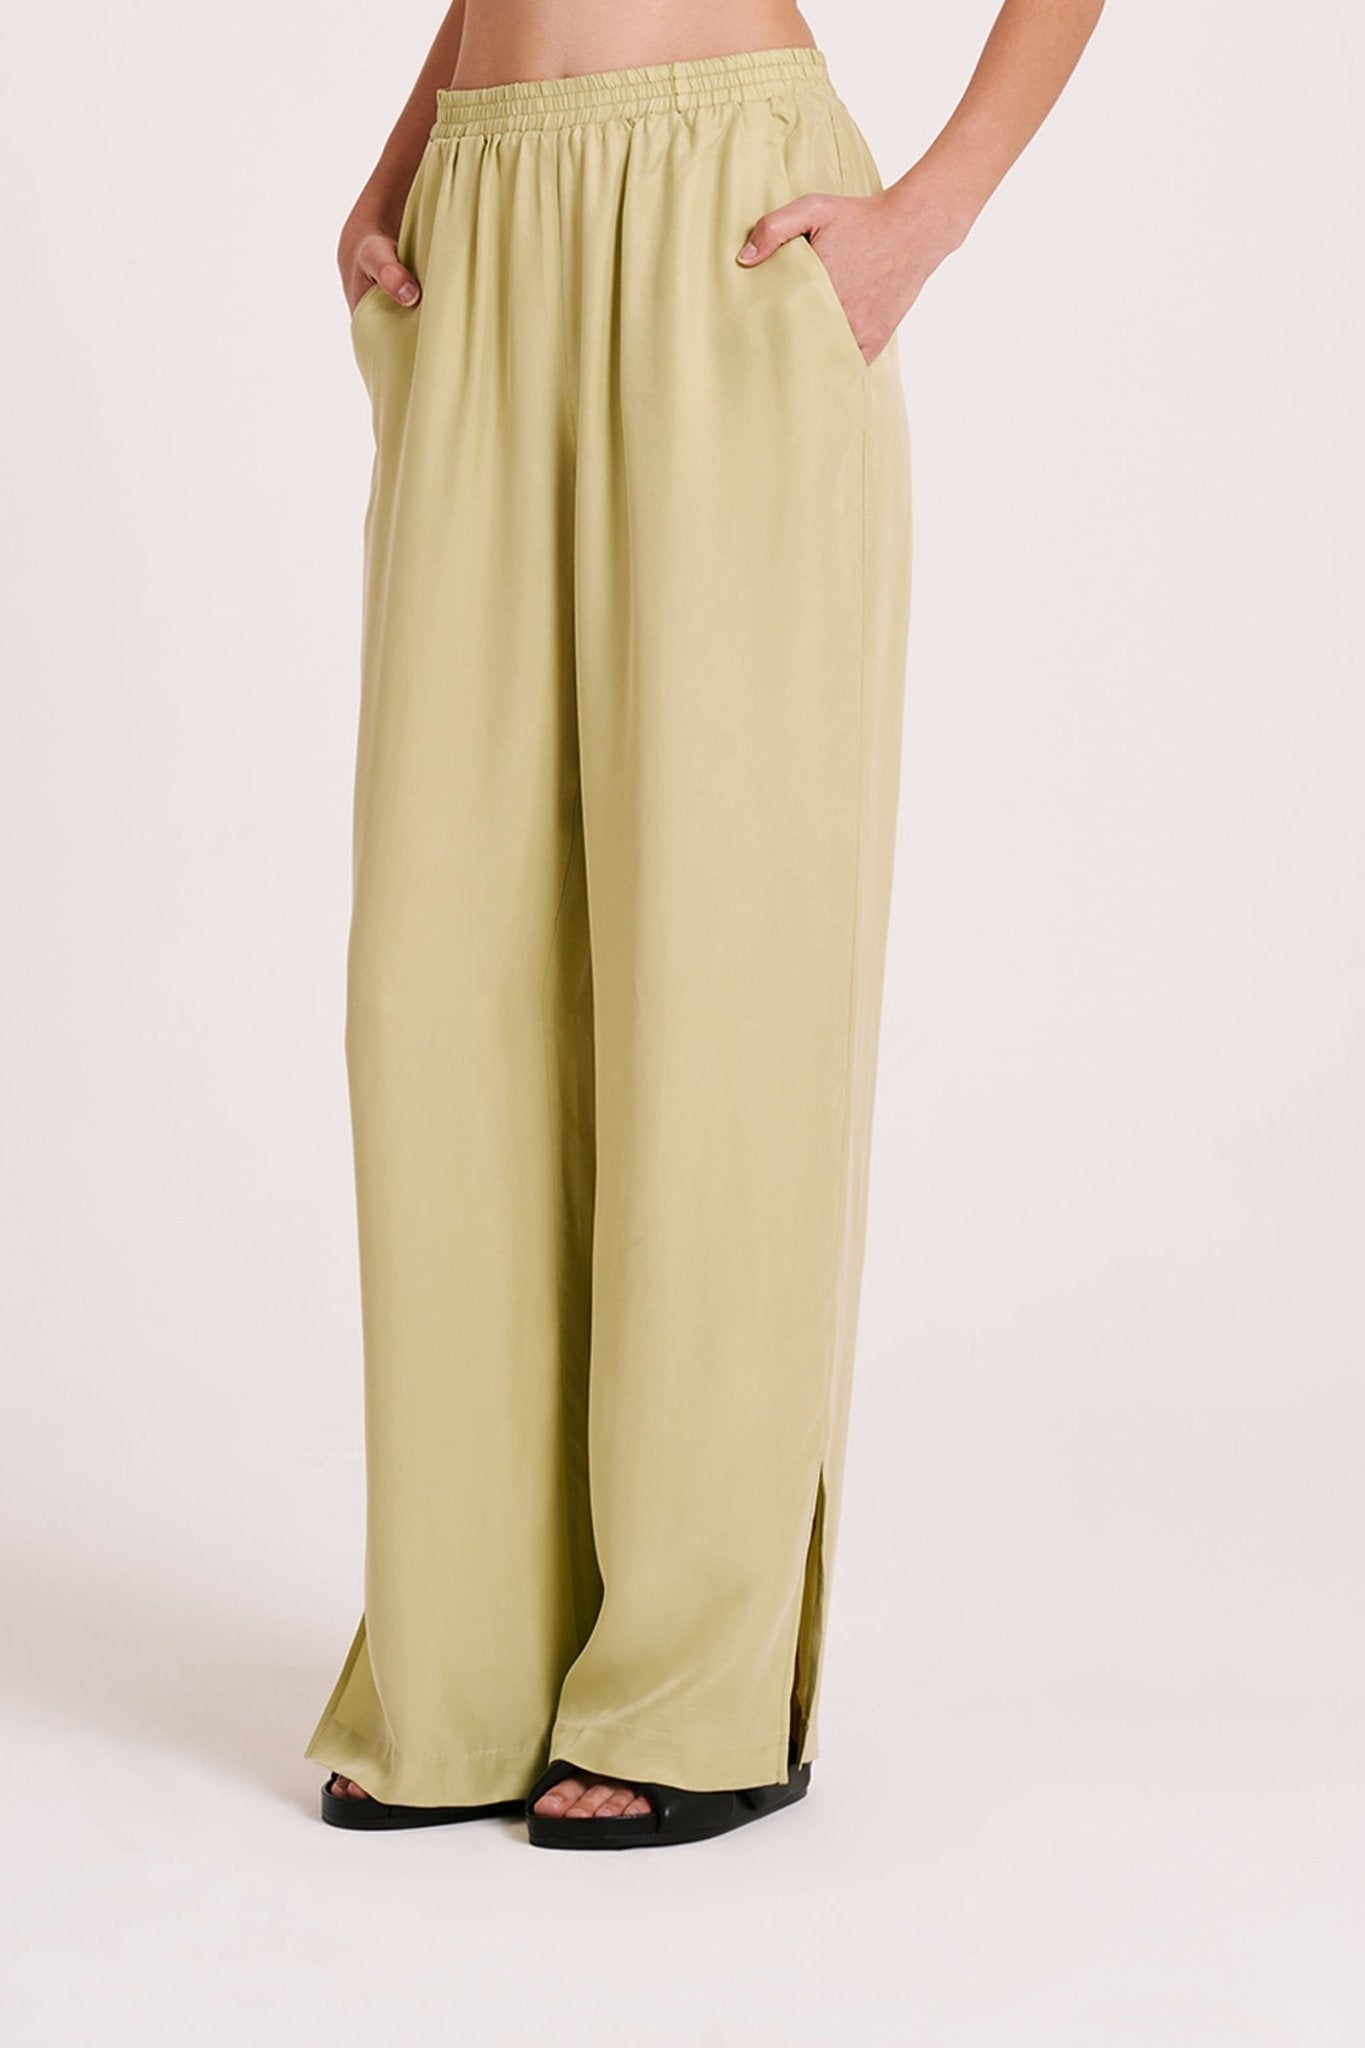 NUDE LUCY DARA CUPRO PANT - LIME - Nude Lucy - Pinkhill - darwin fashion - darwin boutique